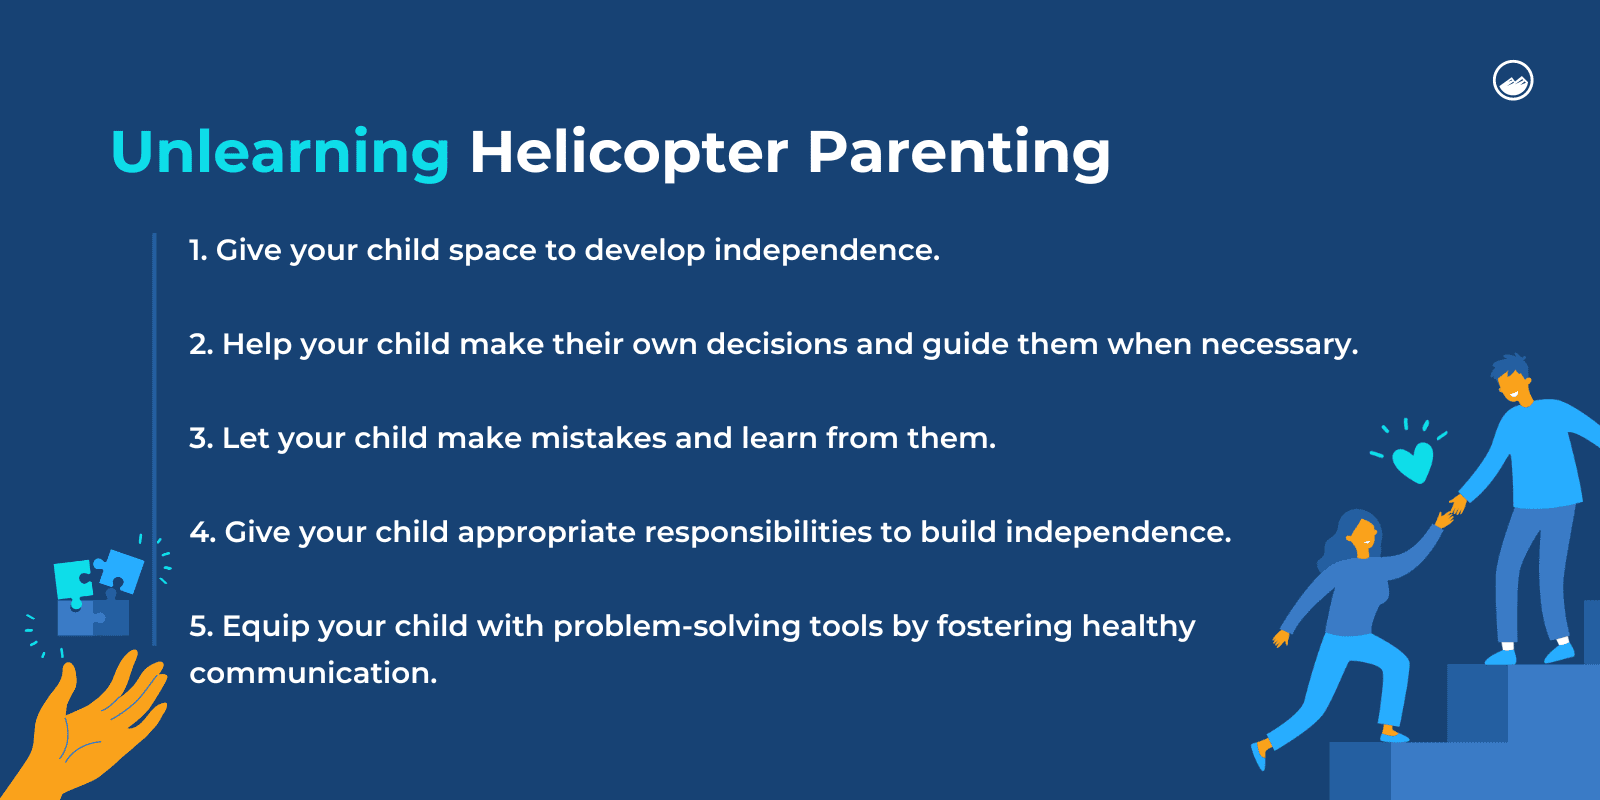 Ways to Unlearn Helicopter Parenting Infographic (1)